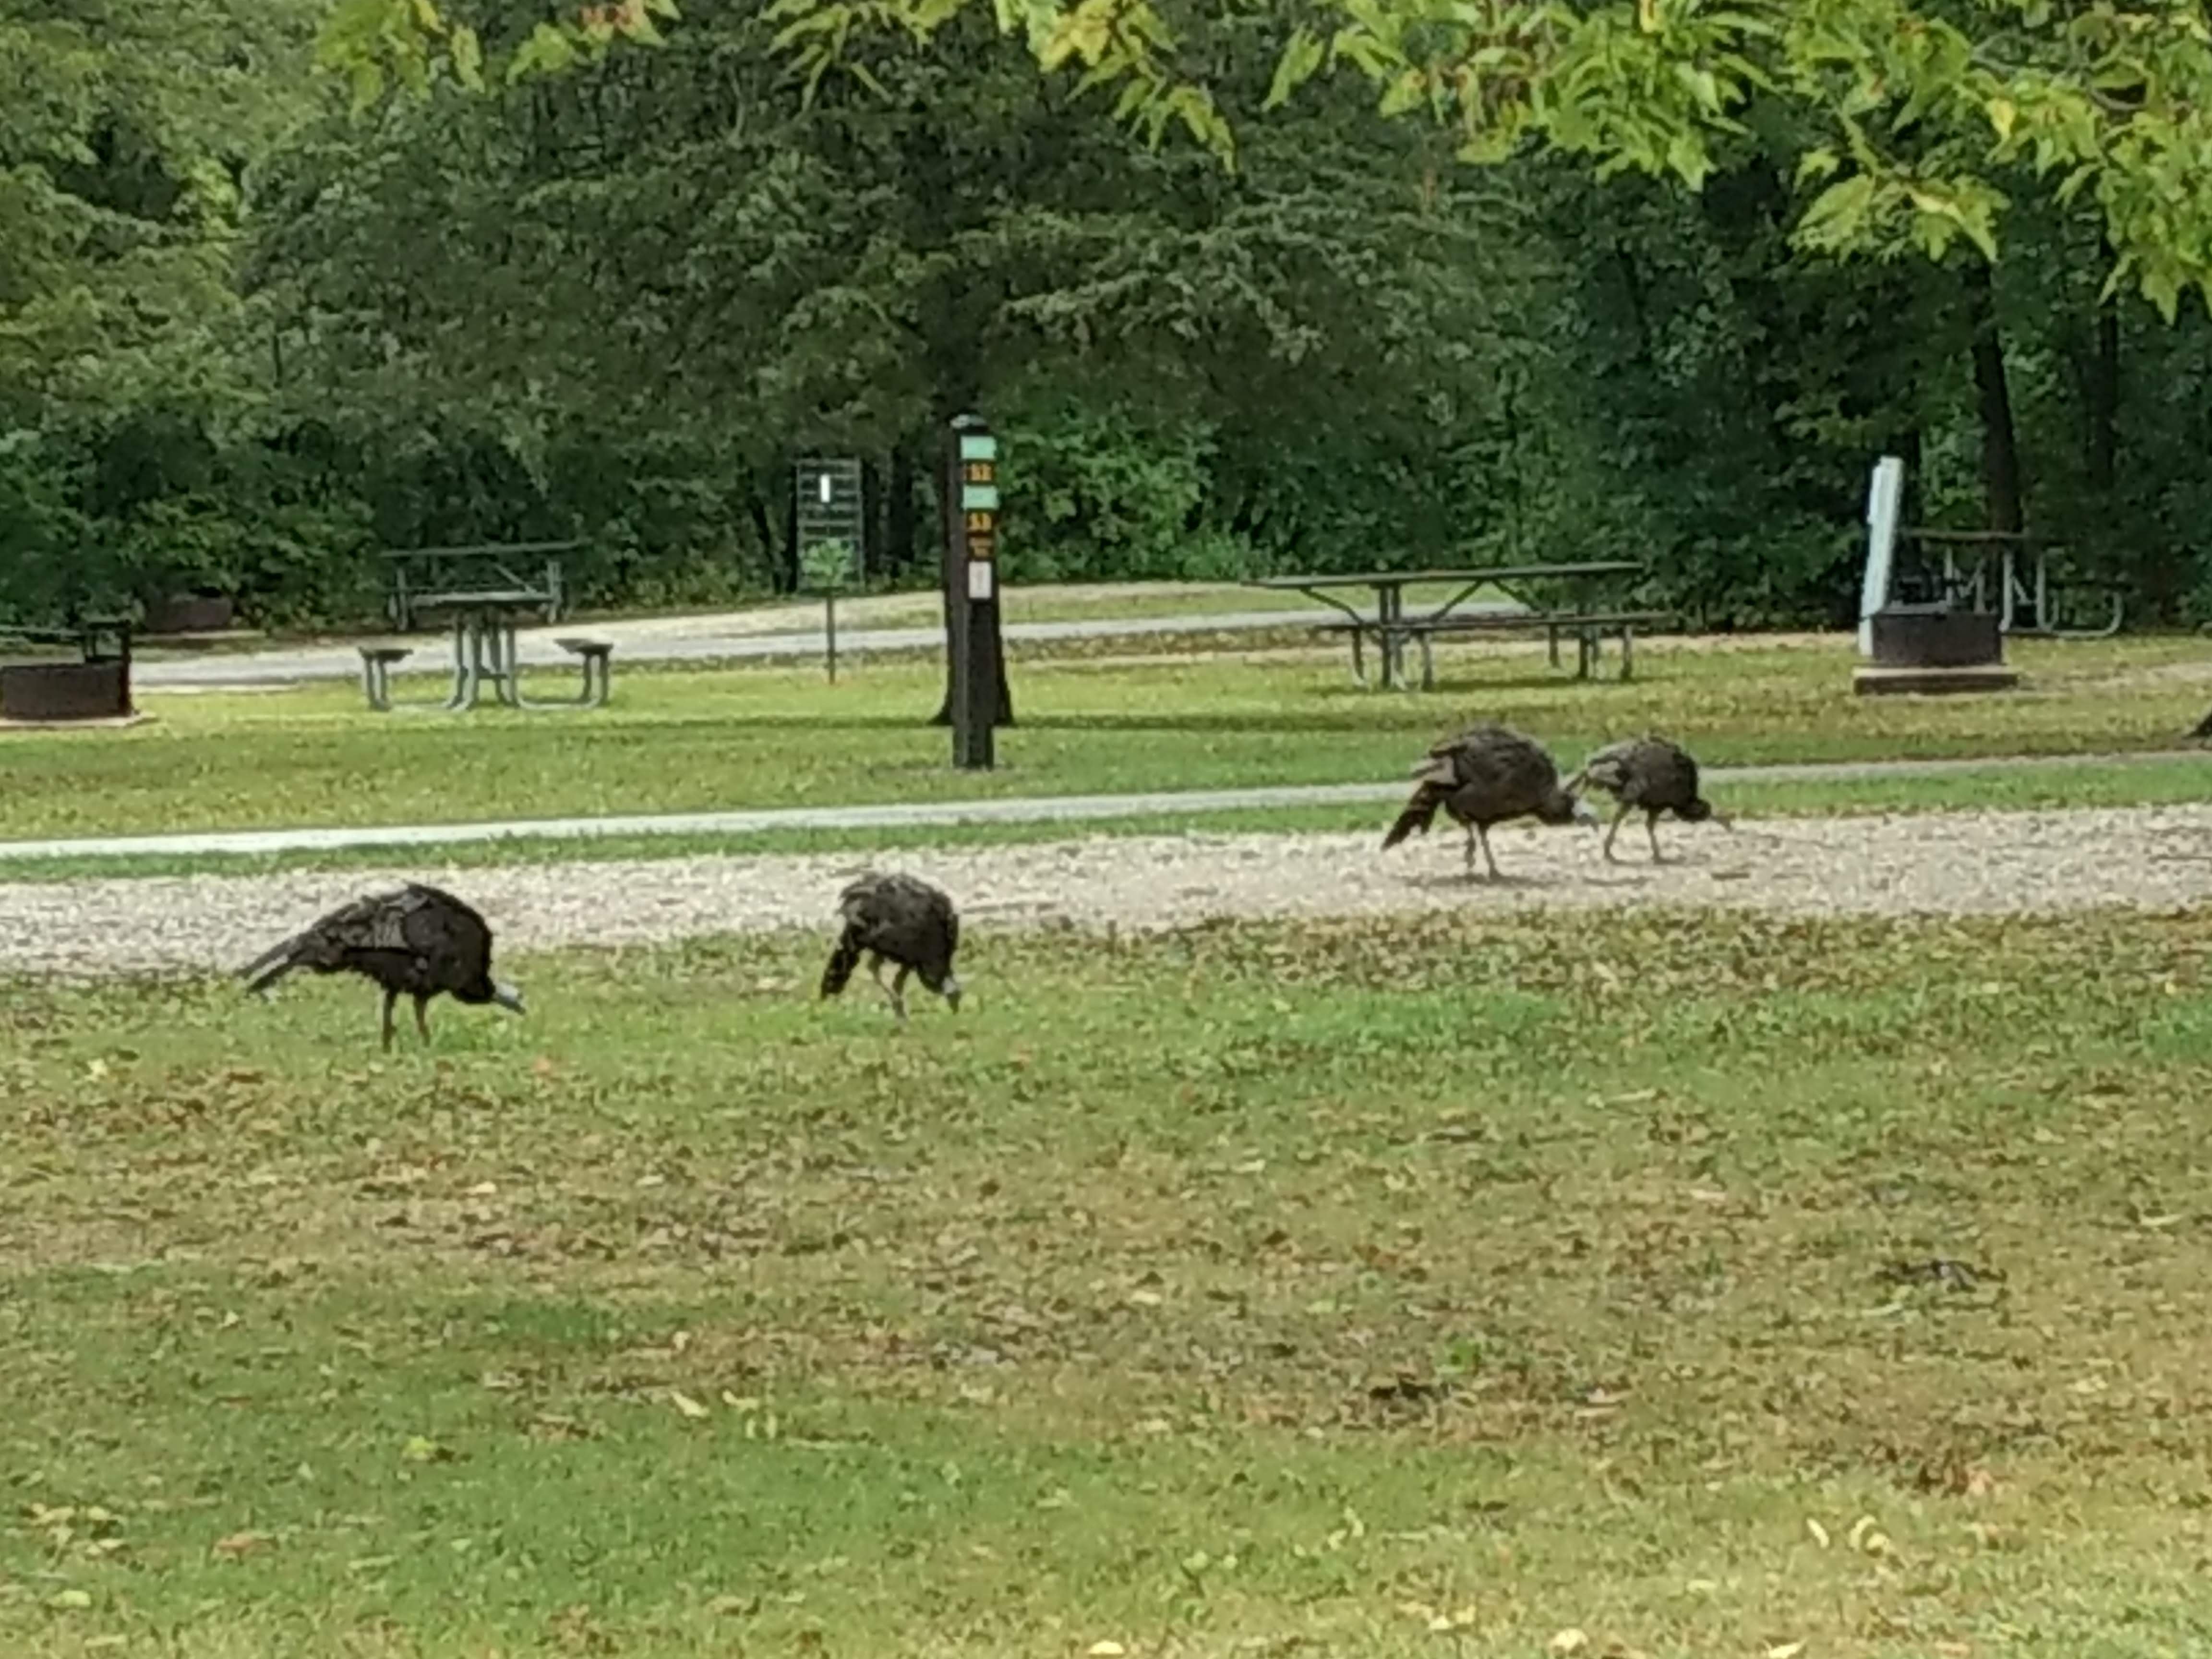 Some of the visitors that are checking out the campgrounds.